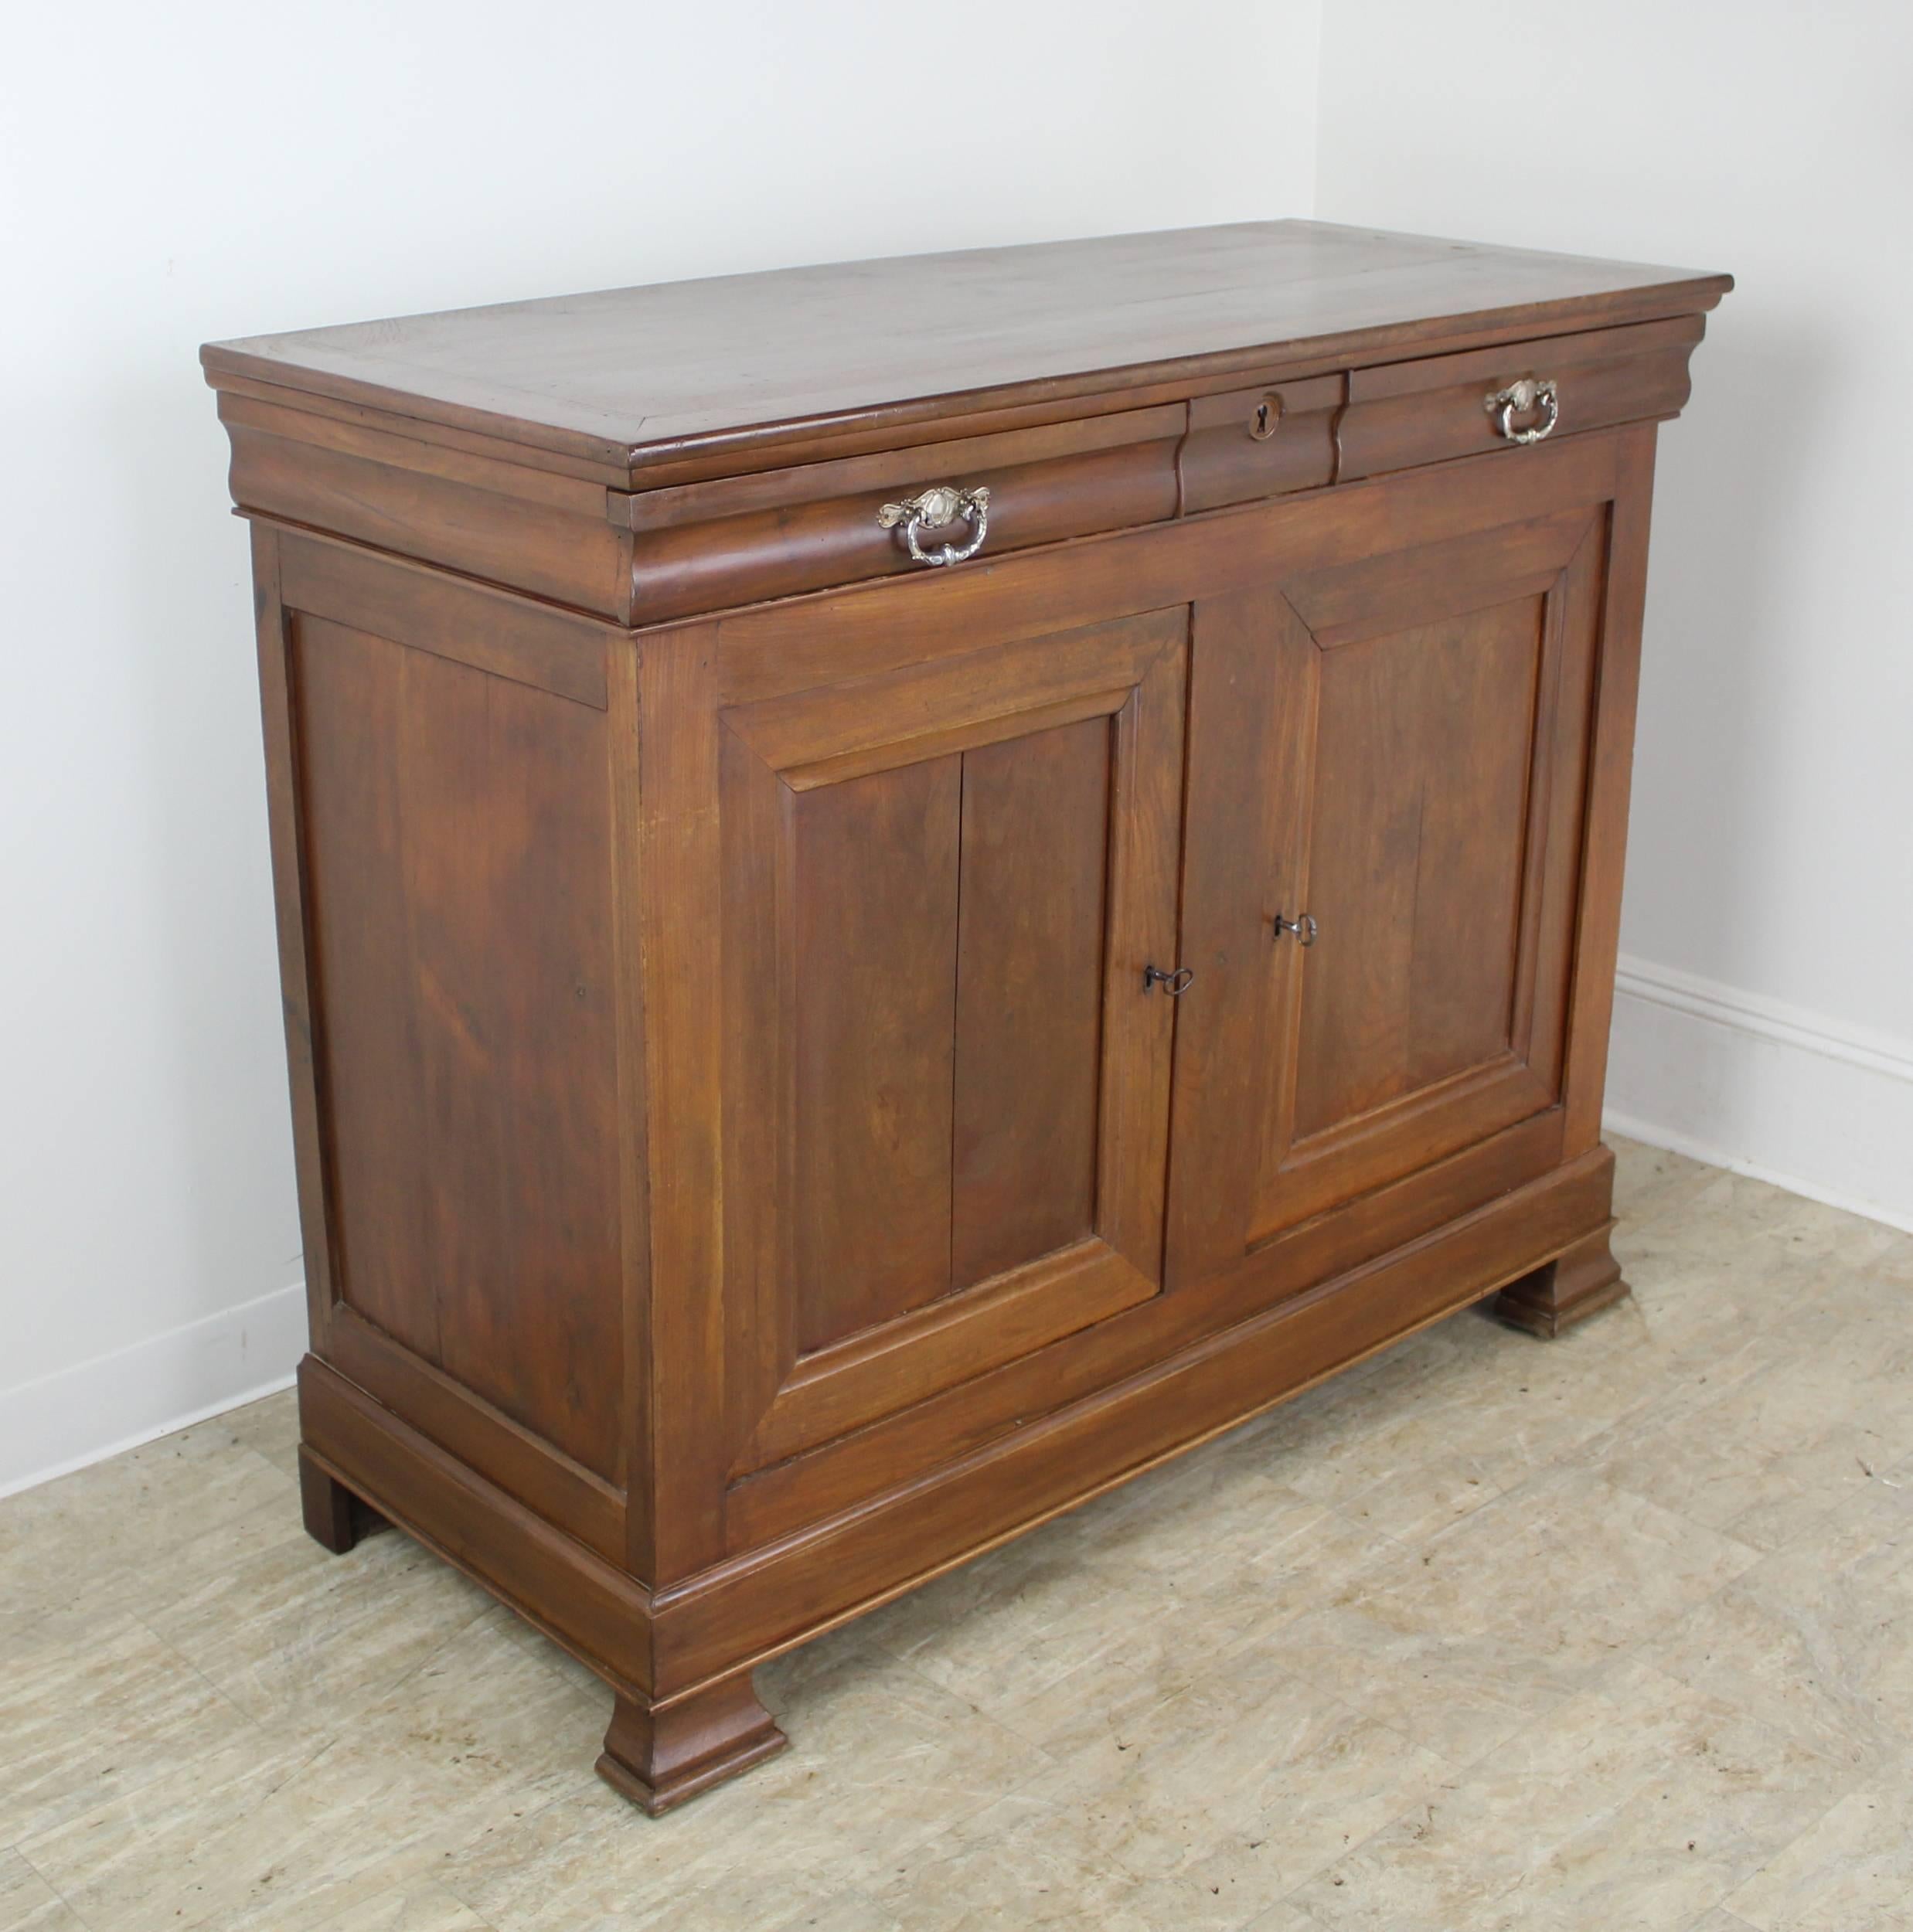 A Louis Philippe buffet with an additional decorative touch--this sideboard has very pretty distressed silver plate handles. Mitred corners at the top, and two drawers over two doors offer good storage space. The walnut grain is lovely, and the